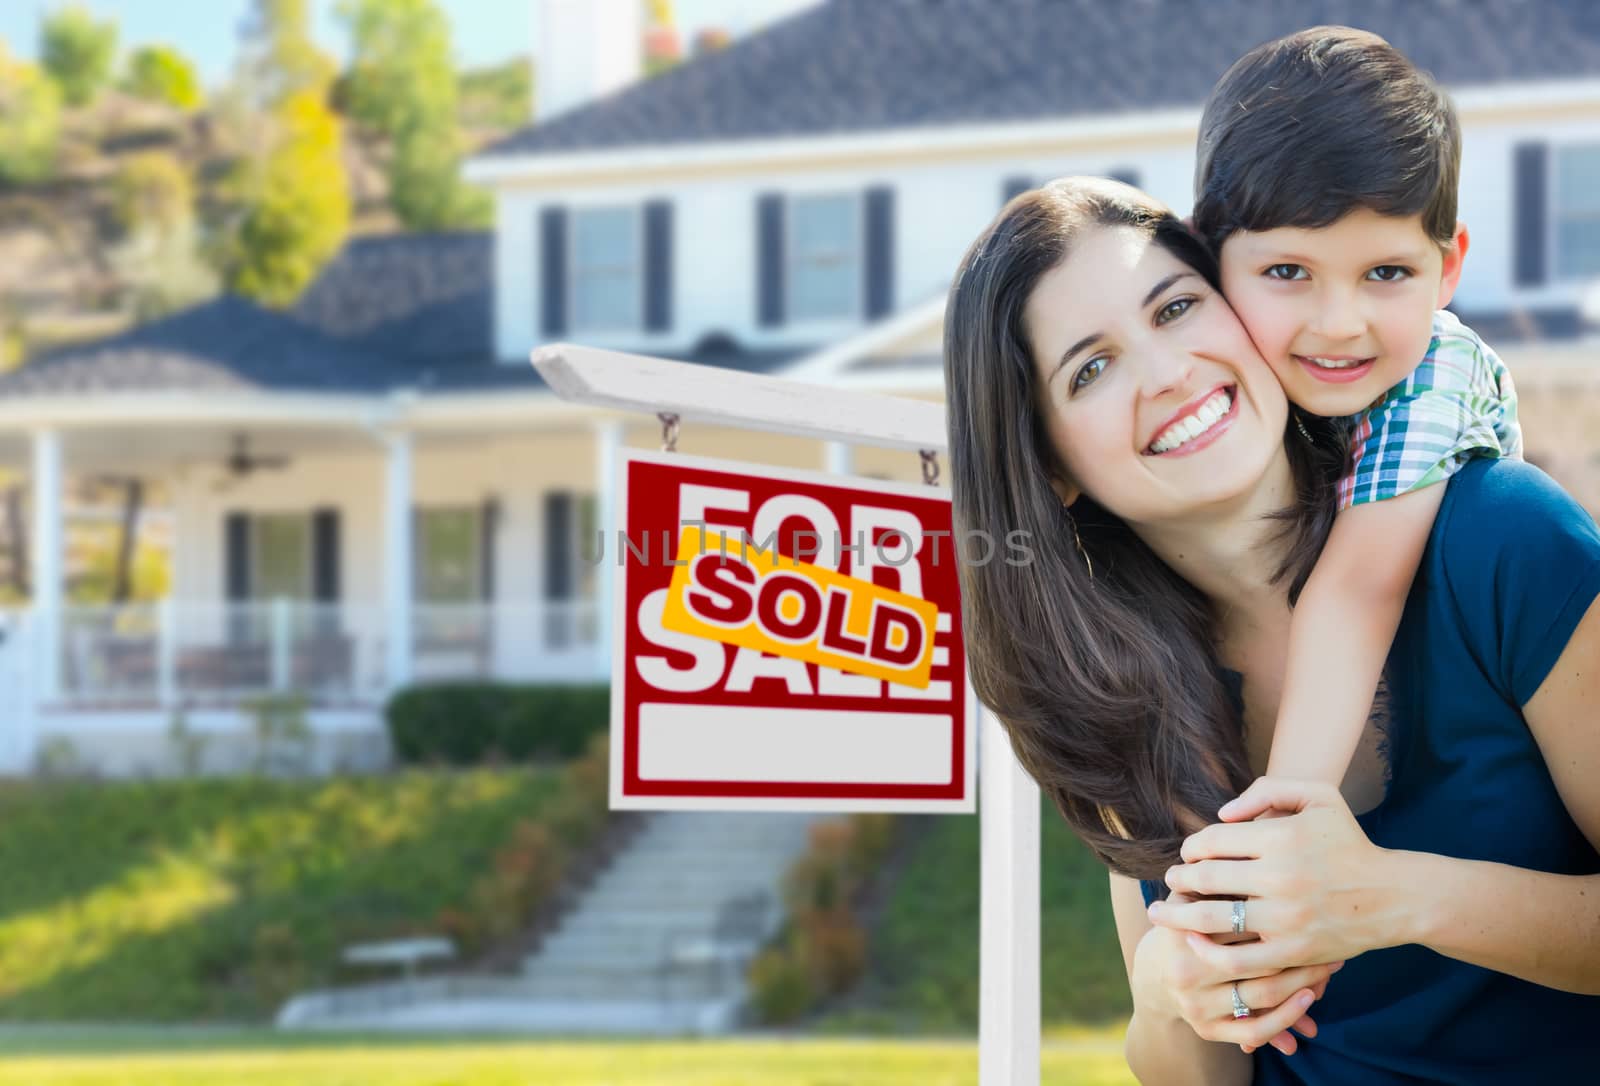 Young Mother and Son In Front of Sold For Sale Real Estate Sign and House.